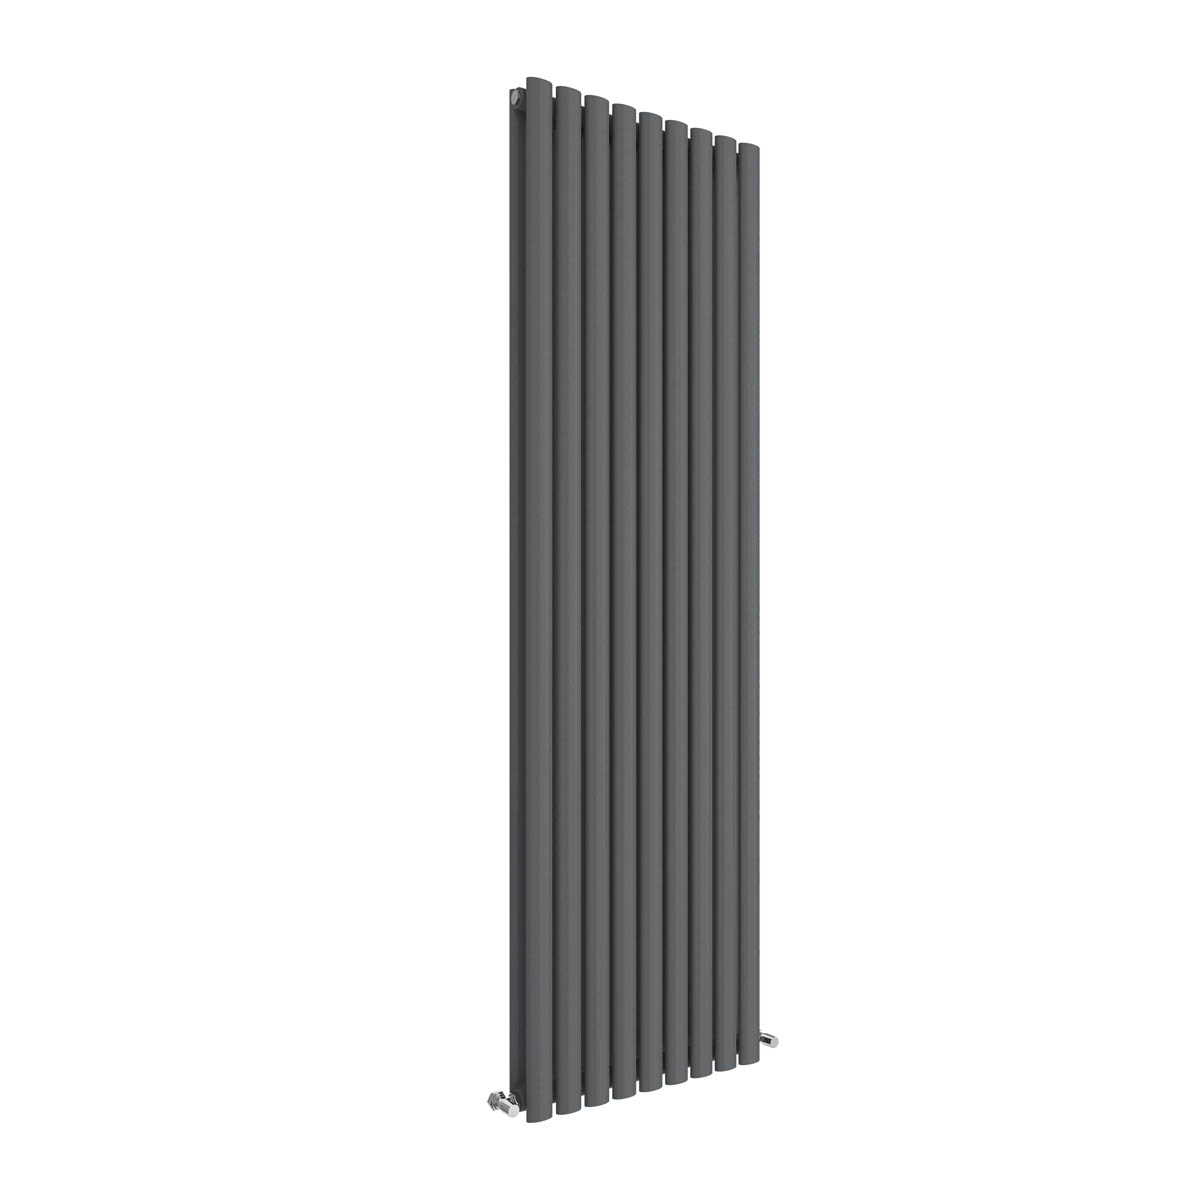 Hudson Reed Revive Vertical Double Panel Radiator 1800 x 528mm - Anthracite (18613)